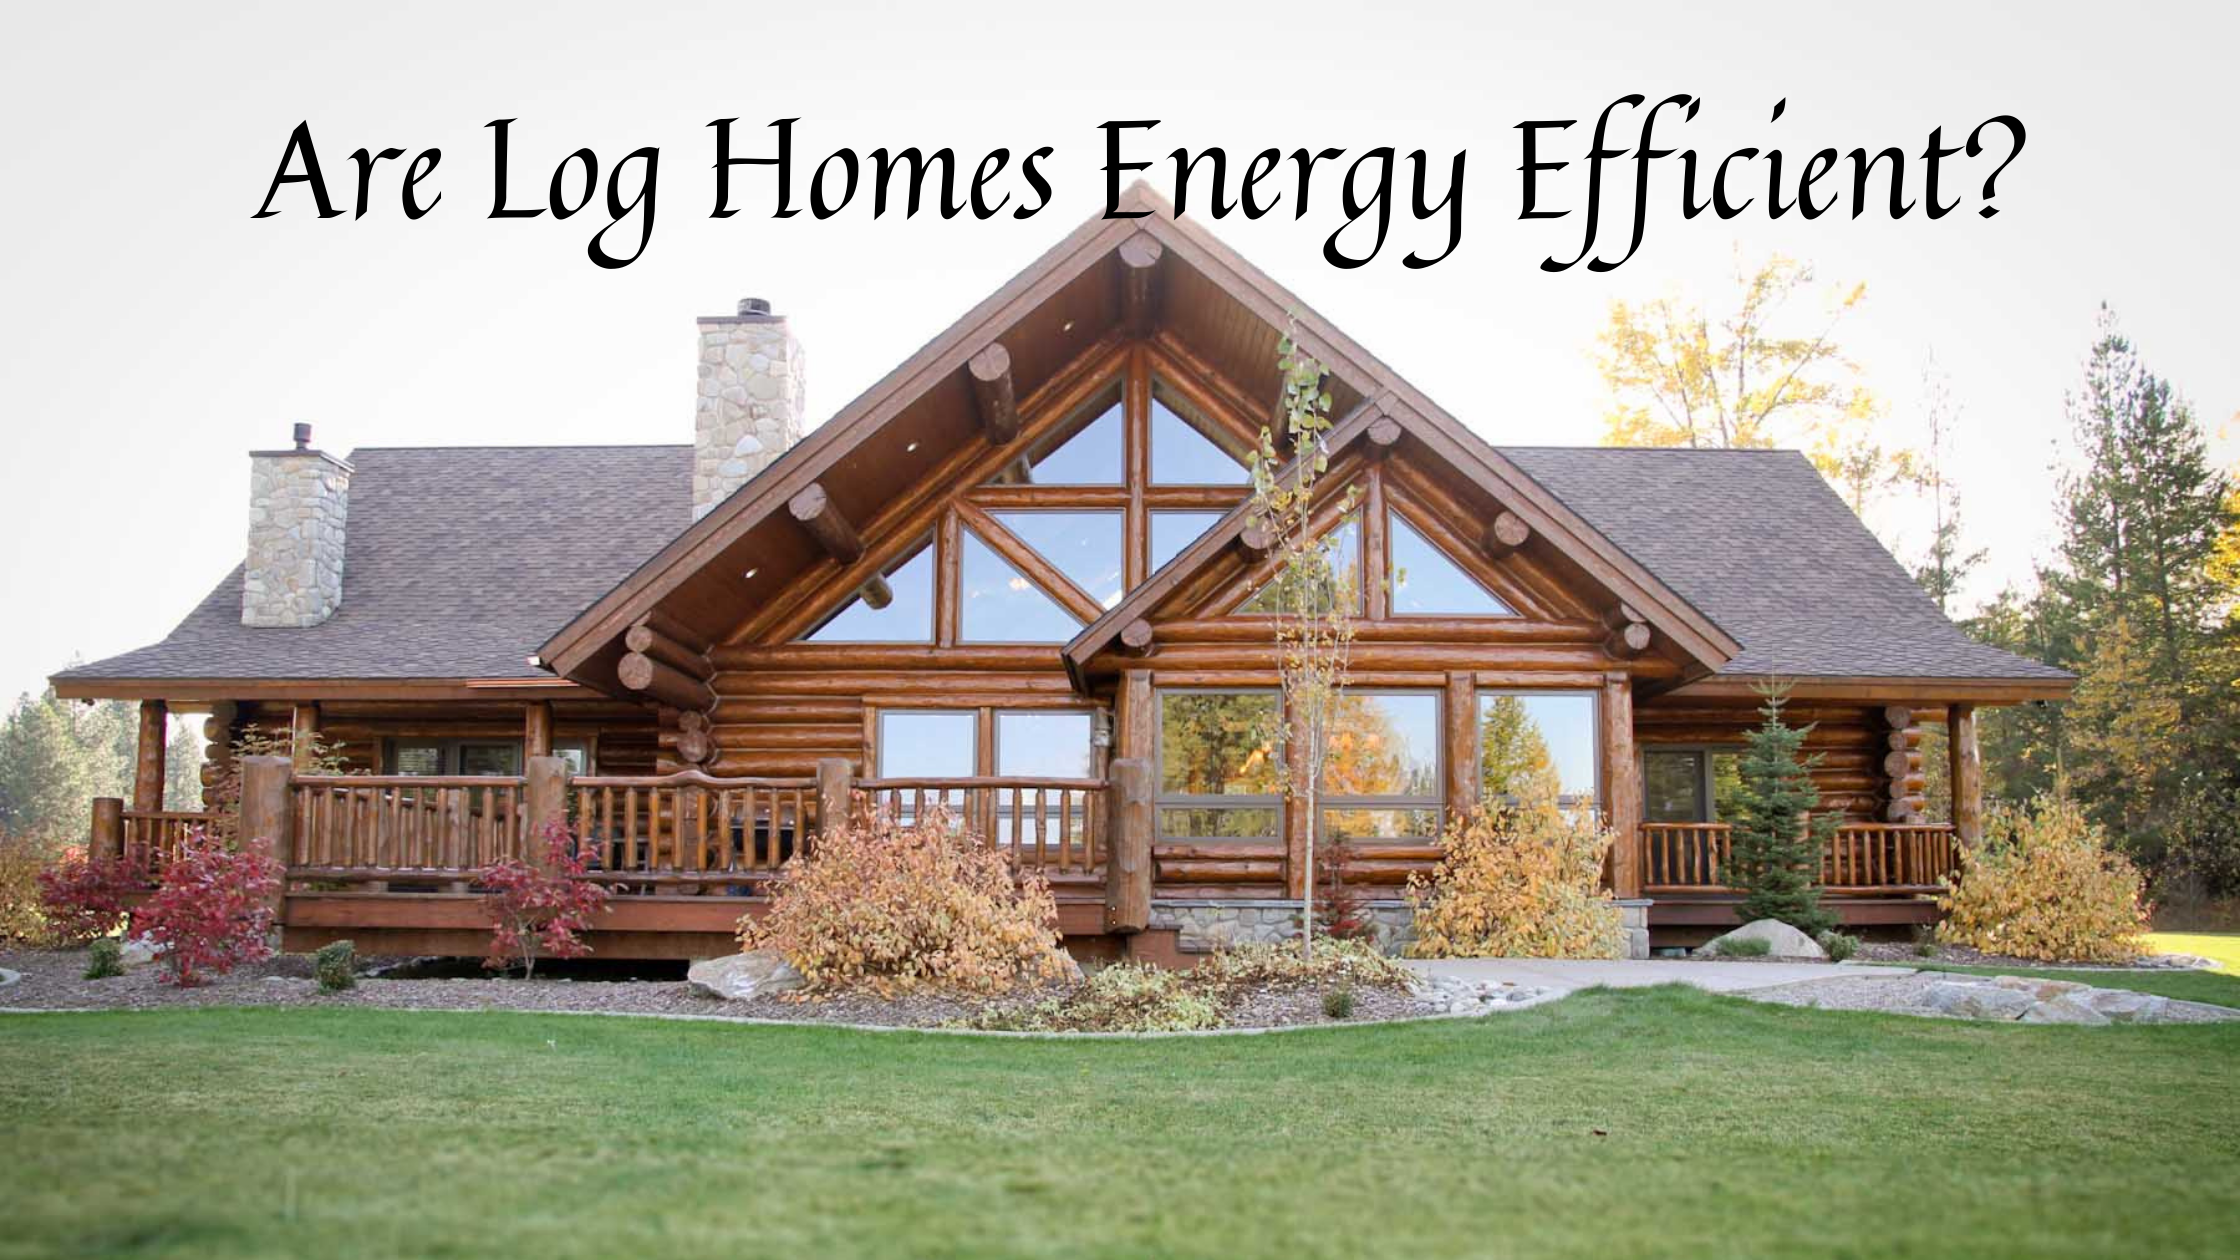 Image of log home with title Are Log Homes Energy Efficient